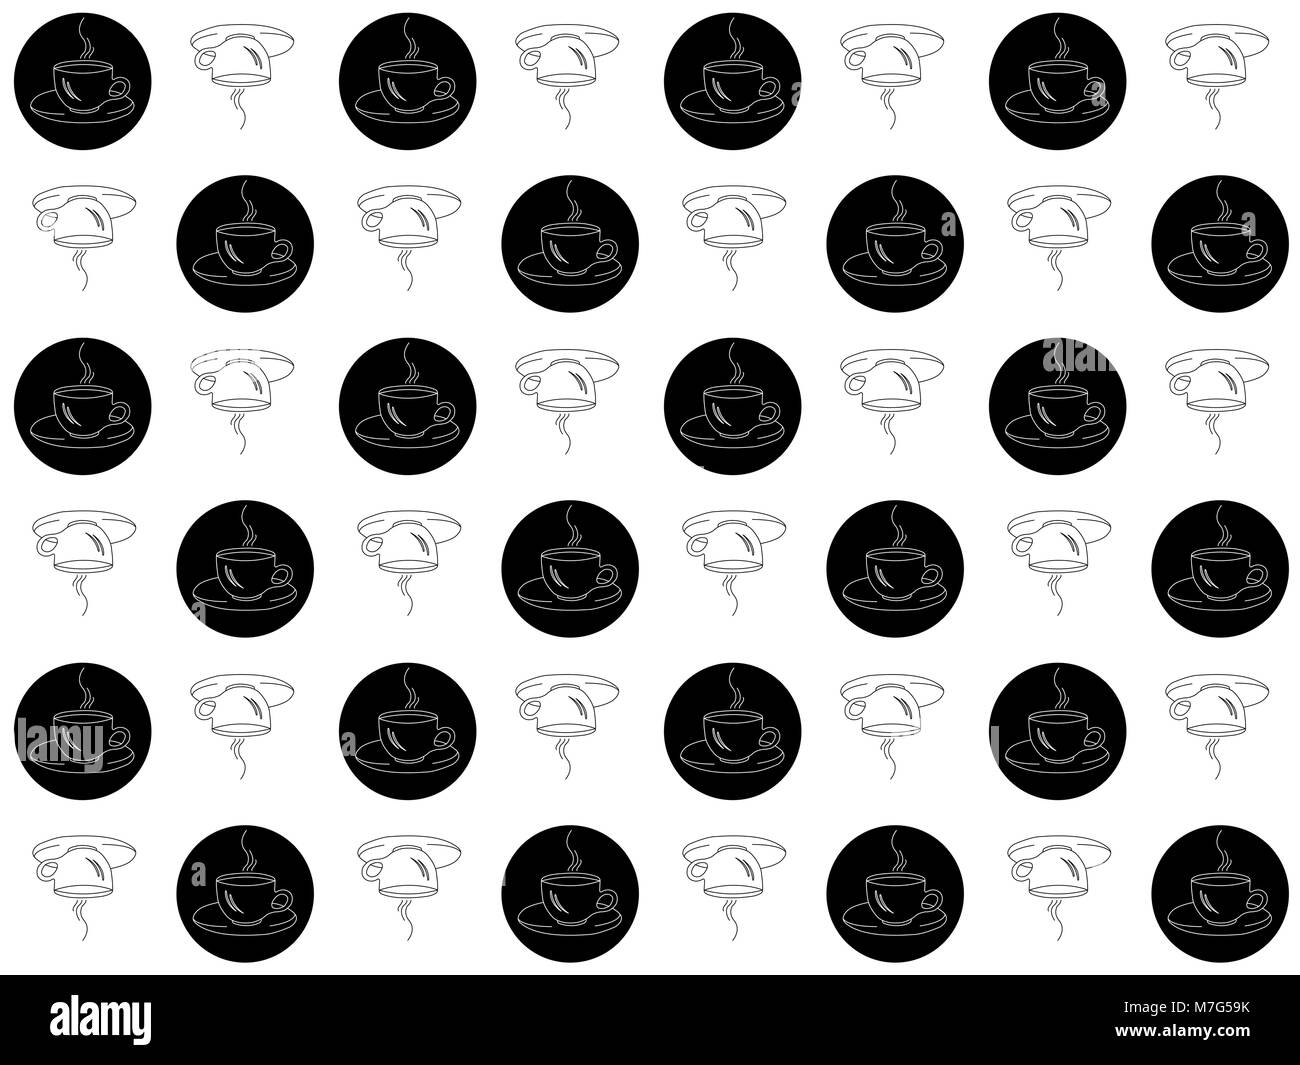 Seamless pattern of black and white coffee cups silhouettes on white background Stock Photo